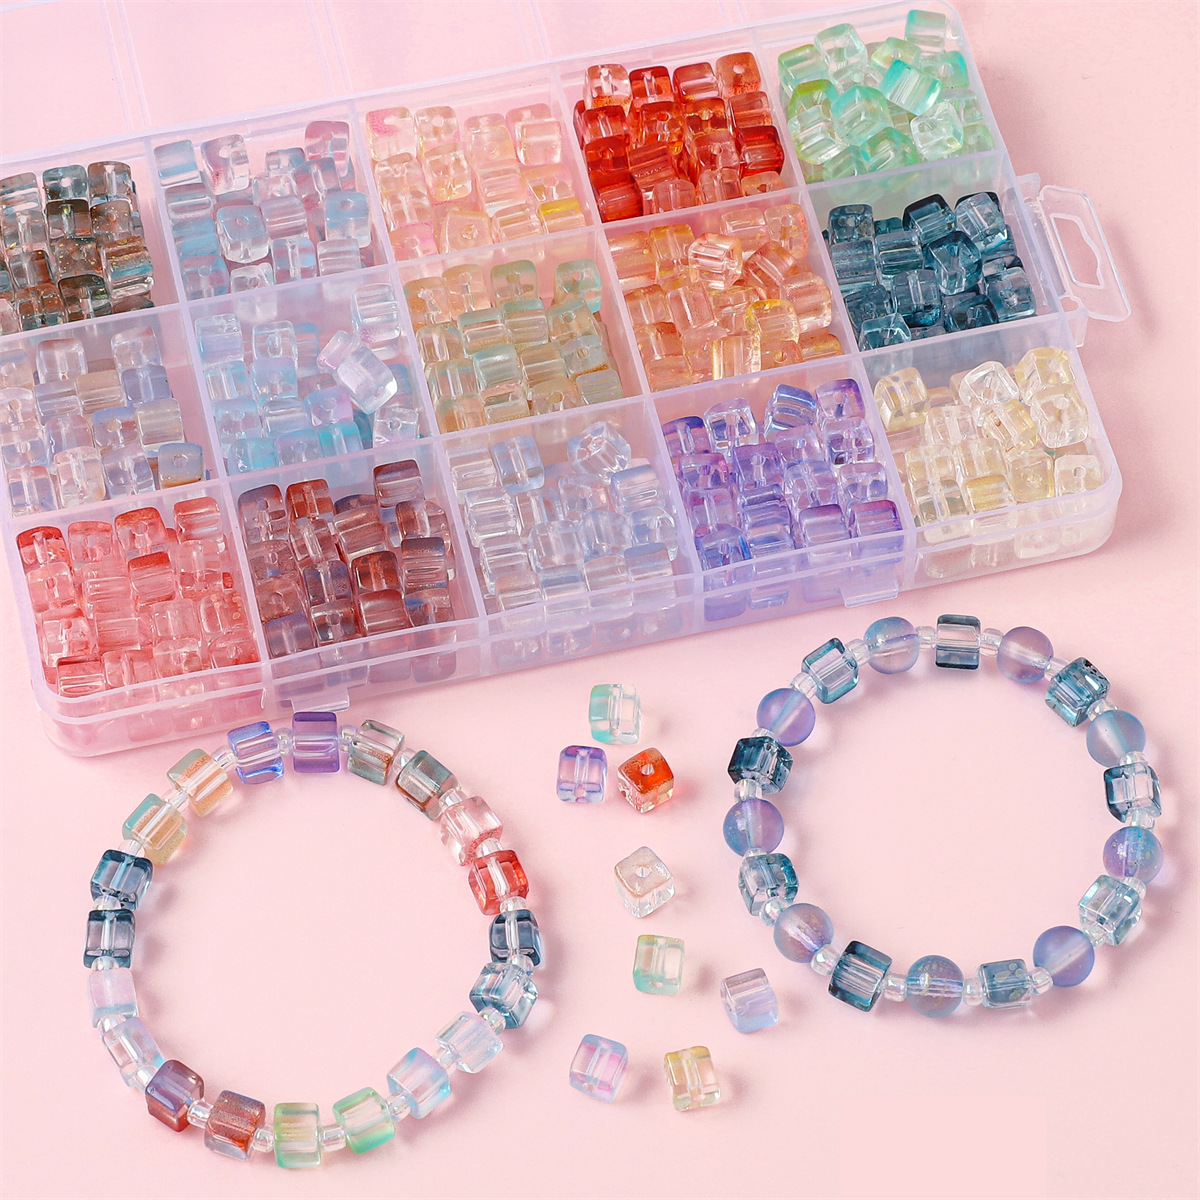 7mm Super Excellent Glass Magic Color Gradient Square Sugar Beads Bead Handmade Diy String Beads Materials Making Bracelet Jewelry Accessories